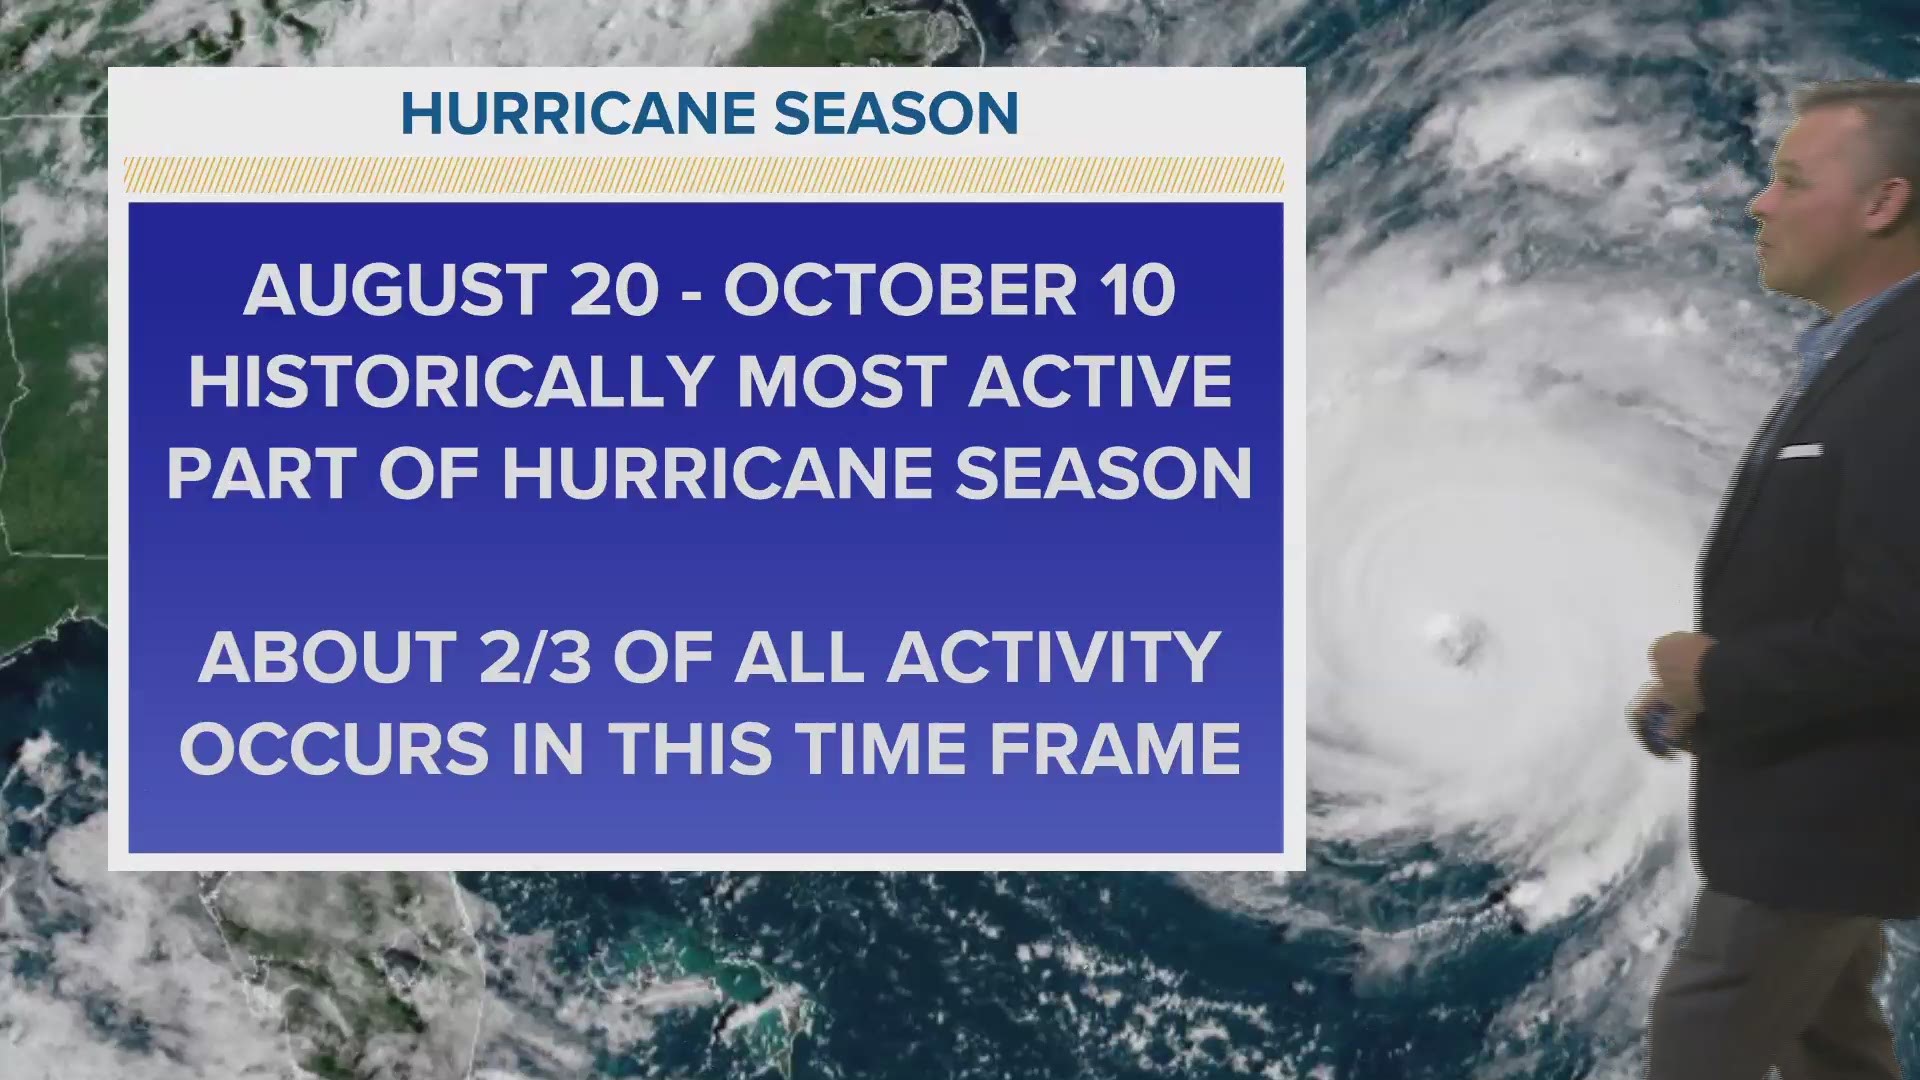 About two-thirds of all Atlantic tropical activity occurs between August 20 and October 10.